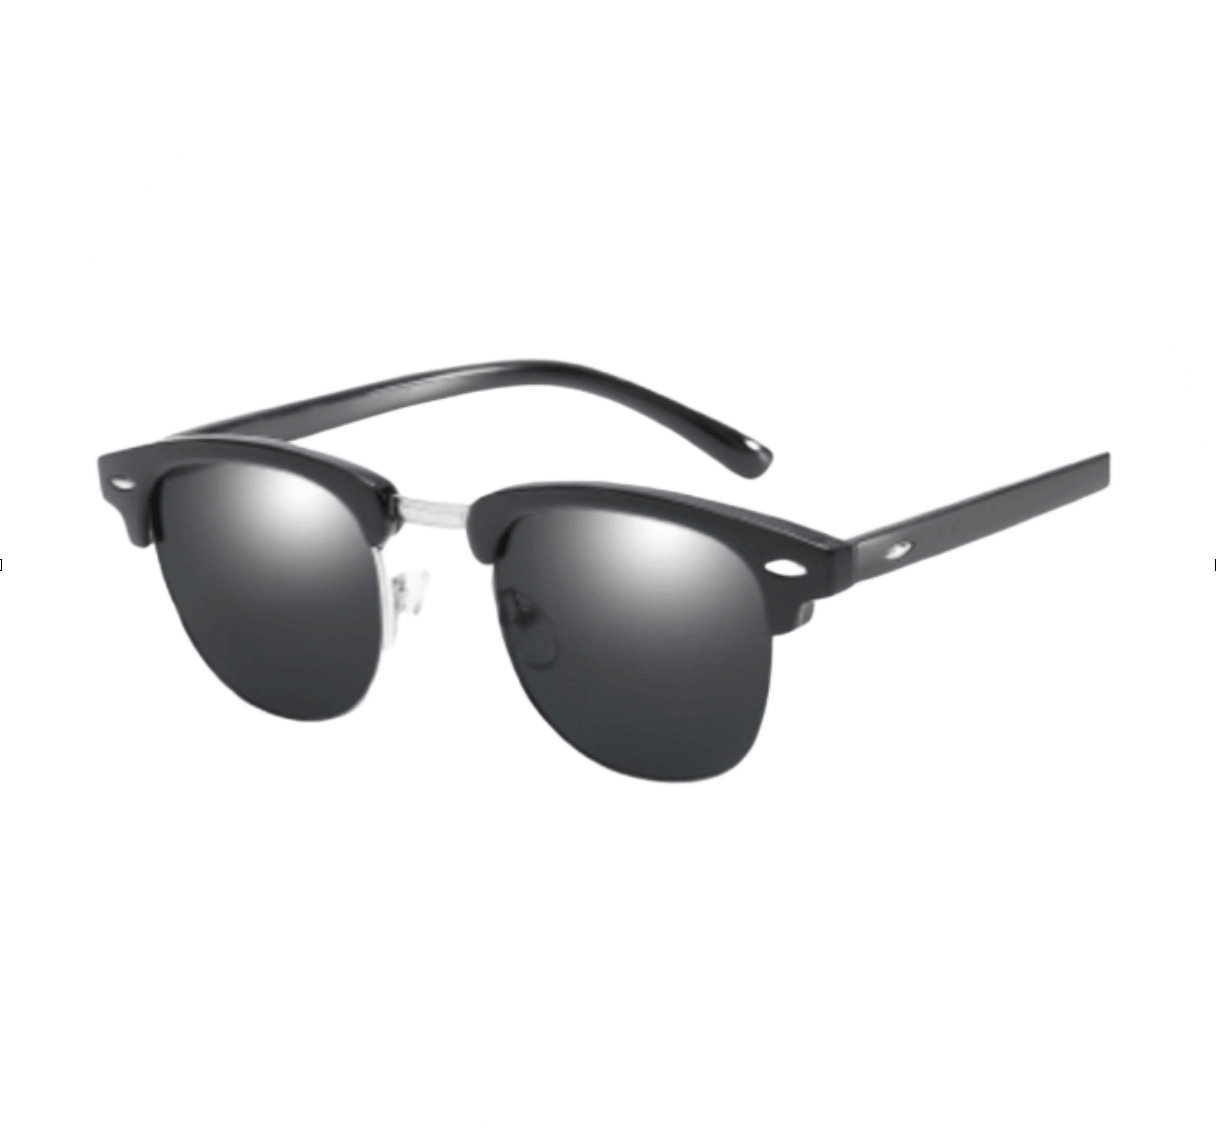 Chinese Sunglasses Manufacturers - Sunglasses Factory in China_Polarized Sunglasses for Men